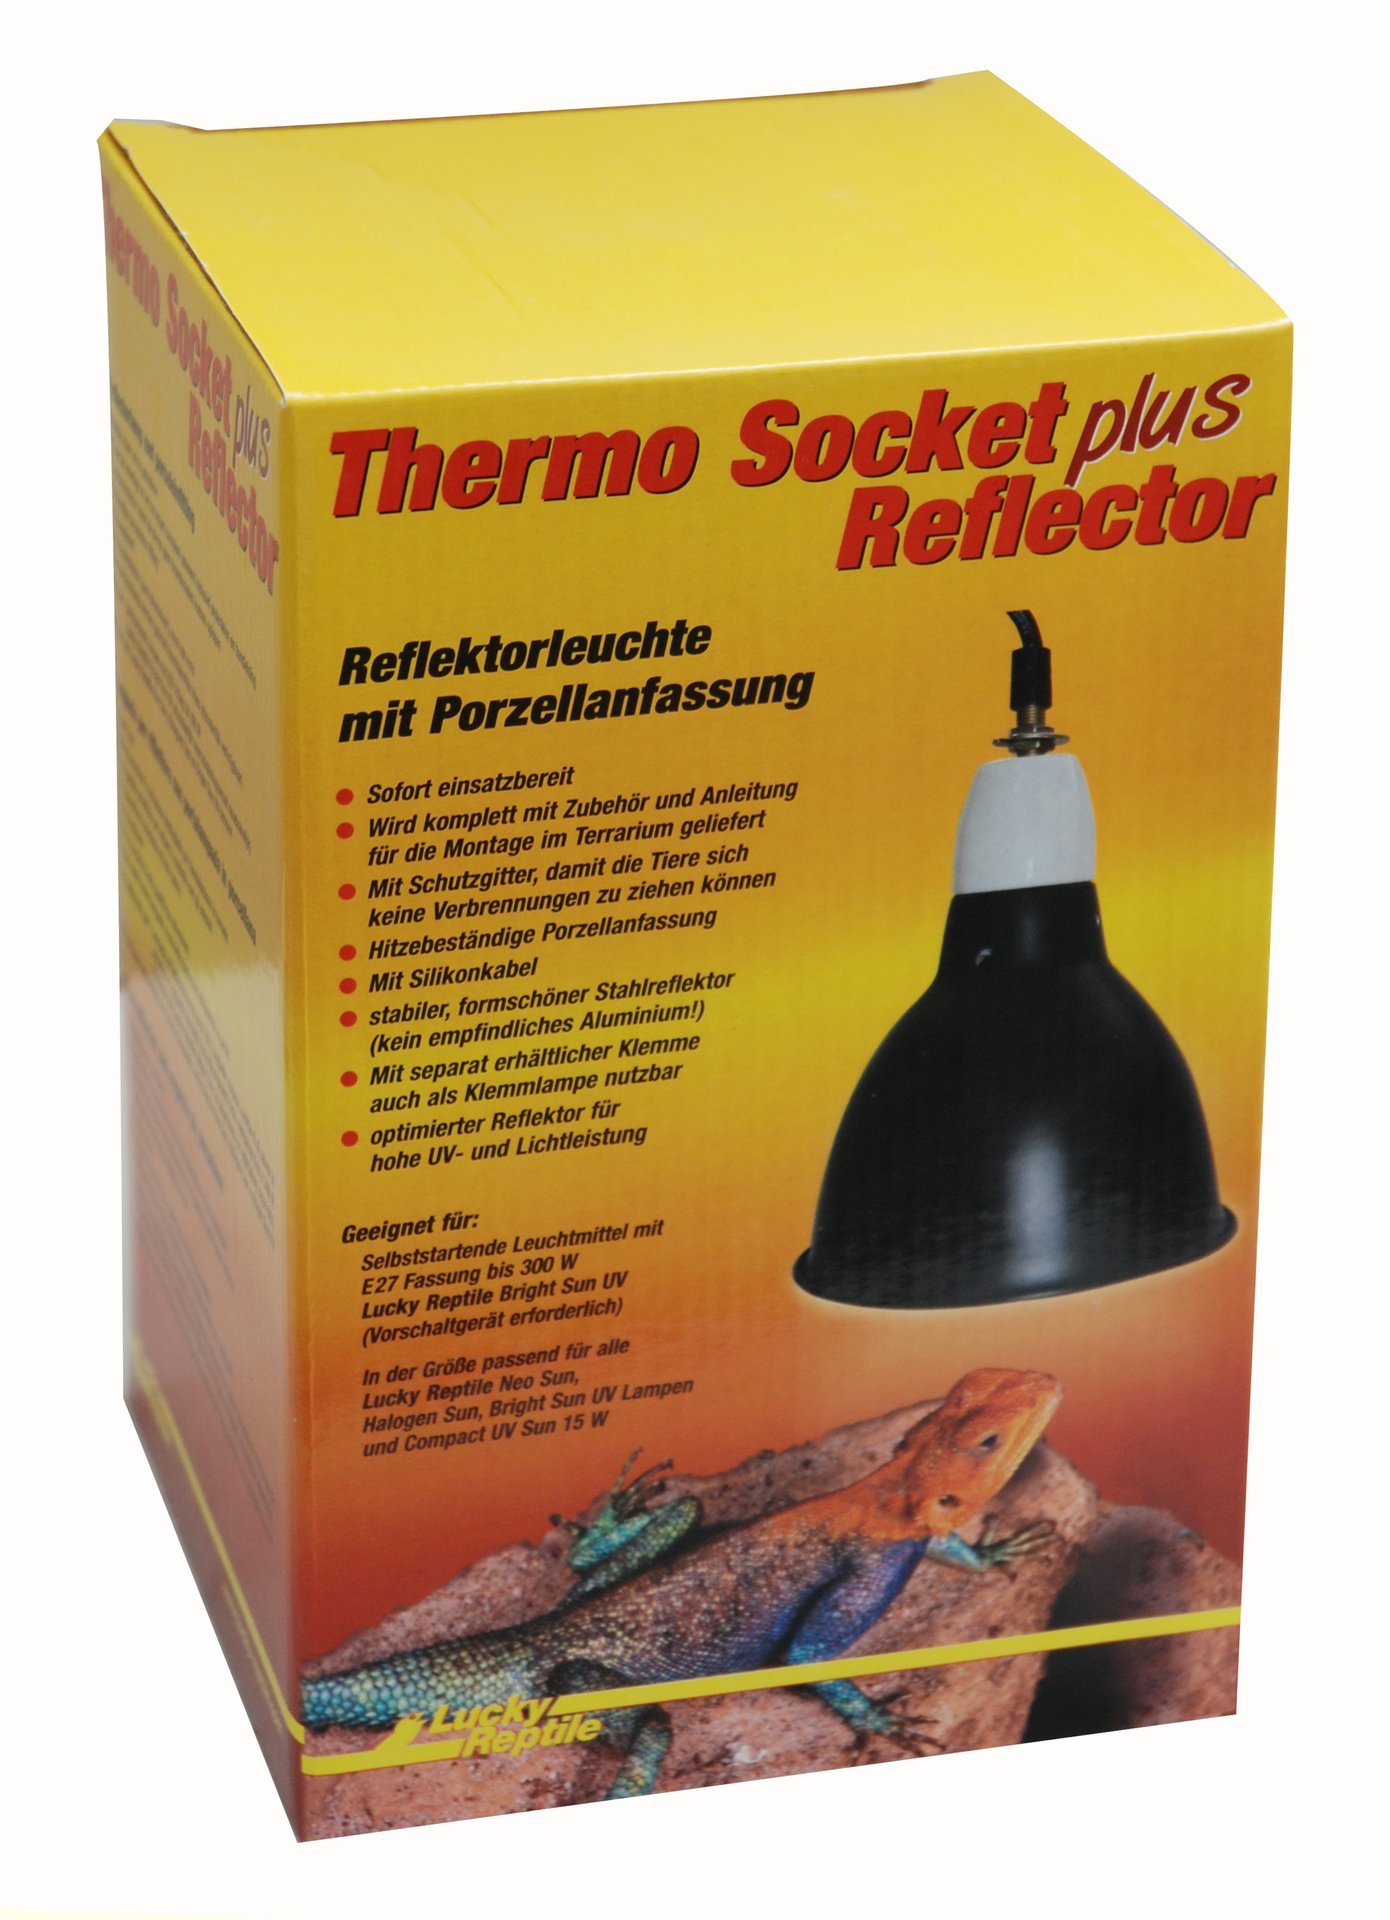 Thermo Socket mit Reflector